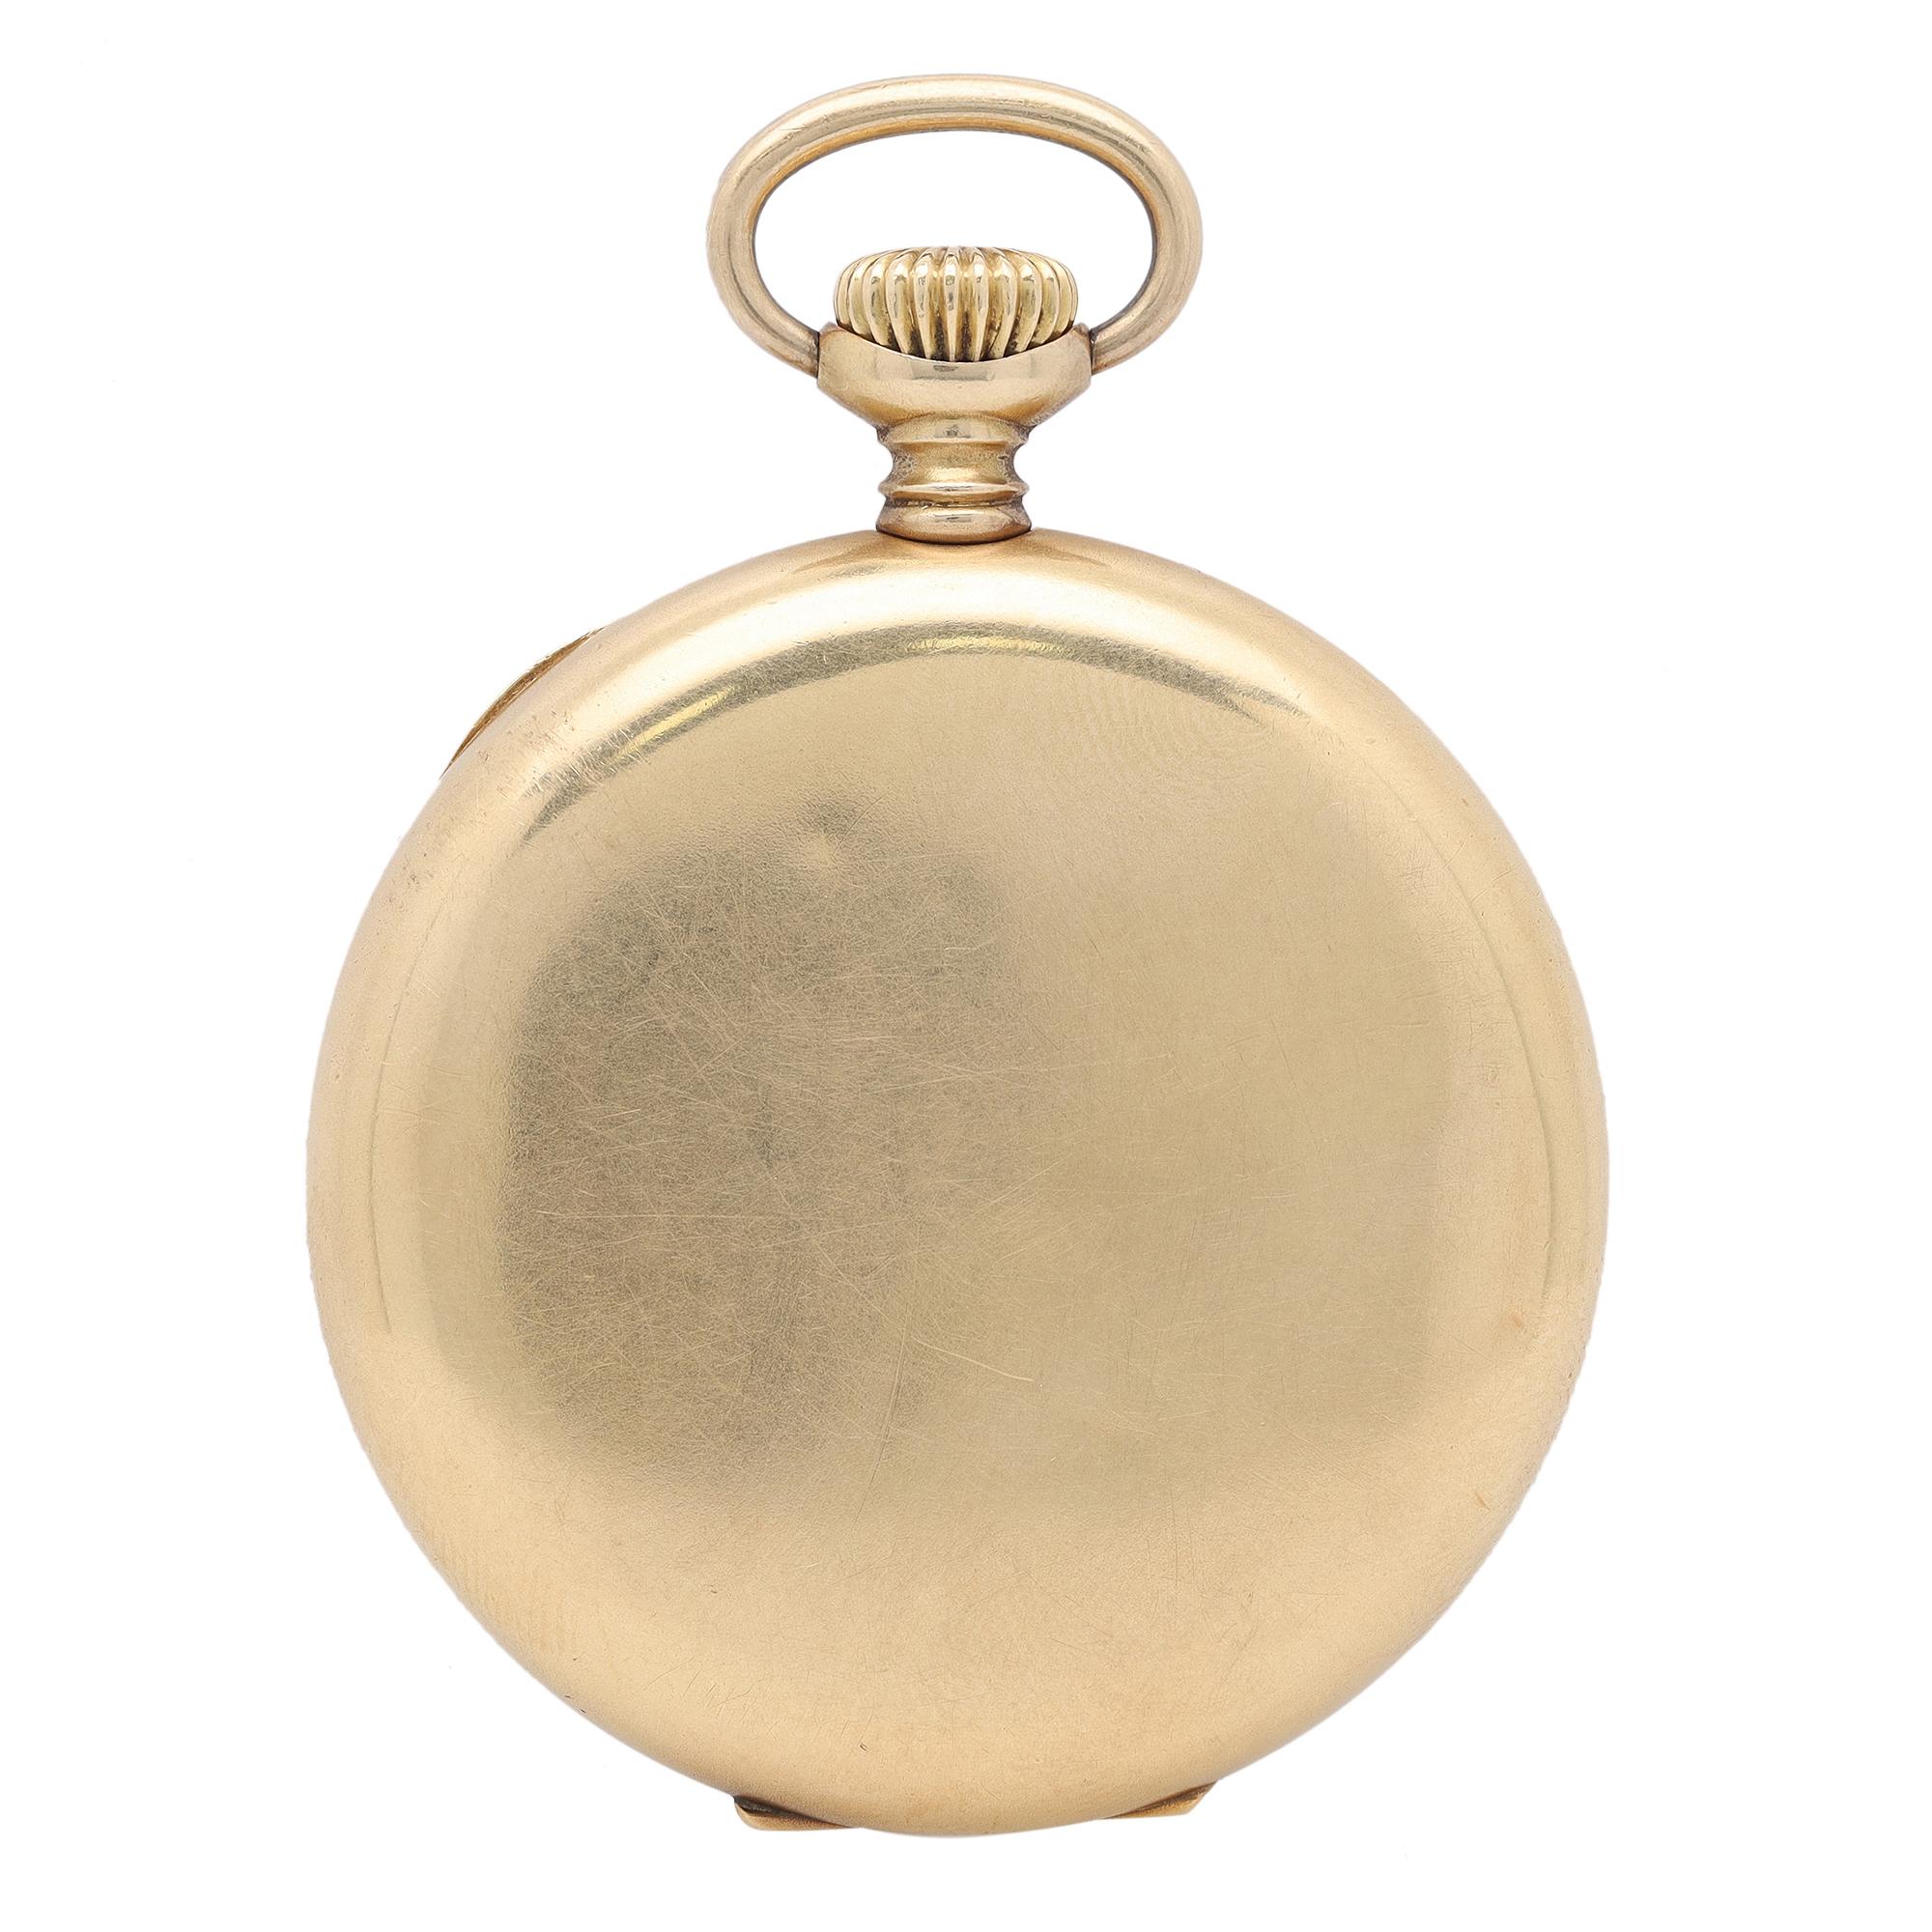 18k Yellow Gold. 15 Jewels. Covered by a 1-year seller warranty.

Brand: Waltham  Type: Pocket Watch  Department: Men  Model Number: 976053  Country/Region of Manufacture: United States  Style: Classic  Features: Fixed Bezel, Push/Pull Crown, Small